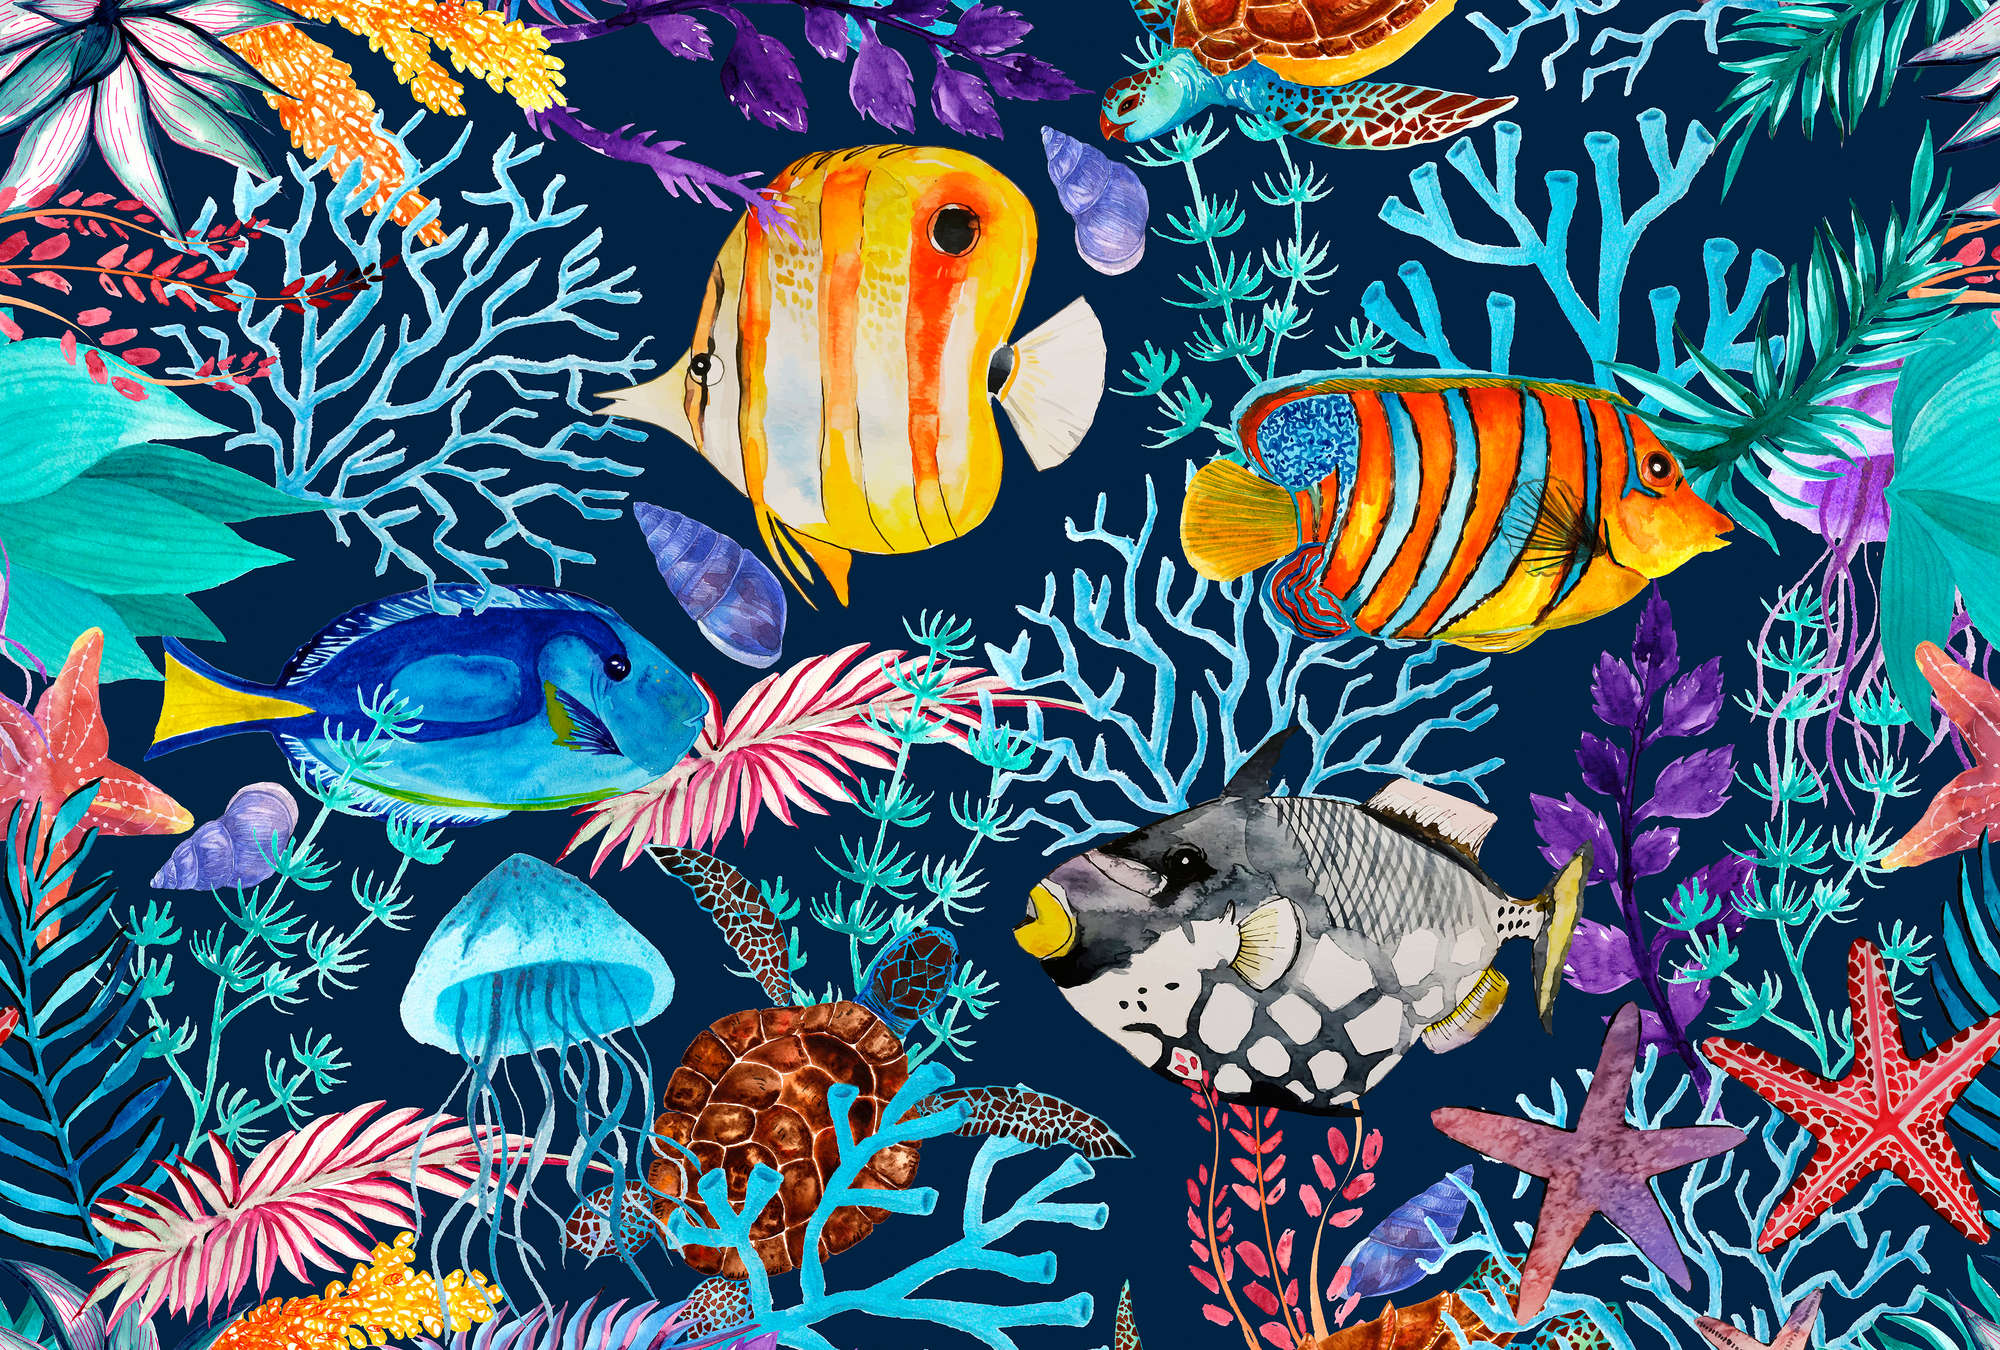             Underwater mural with colourful fishes & starfishes
        